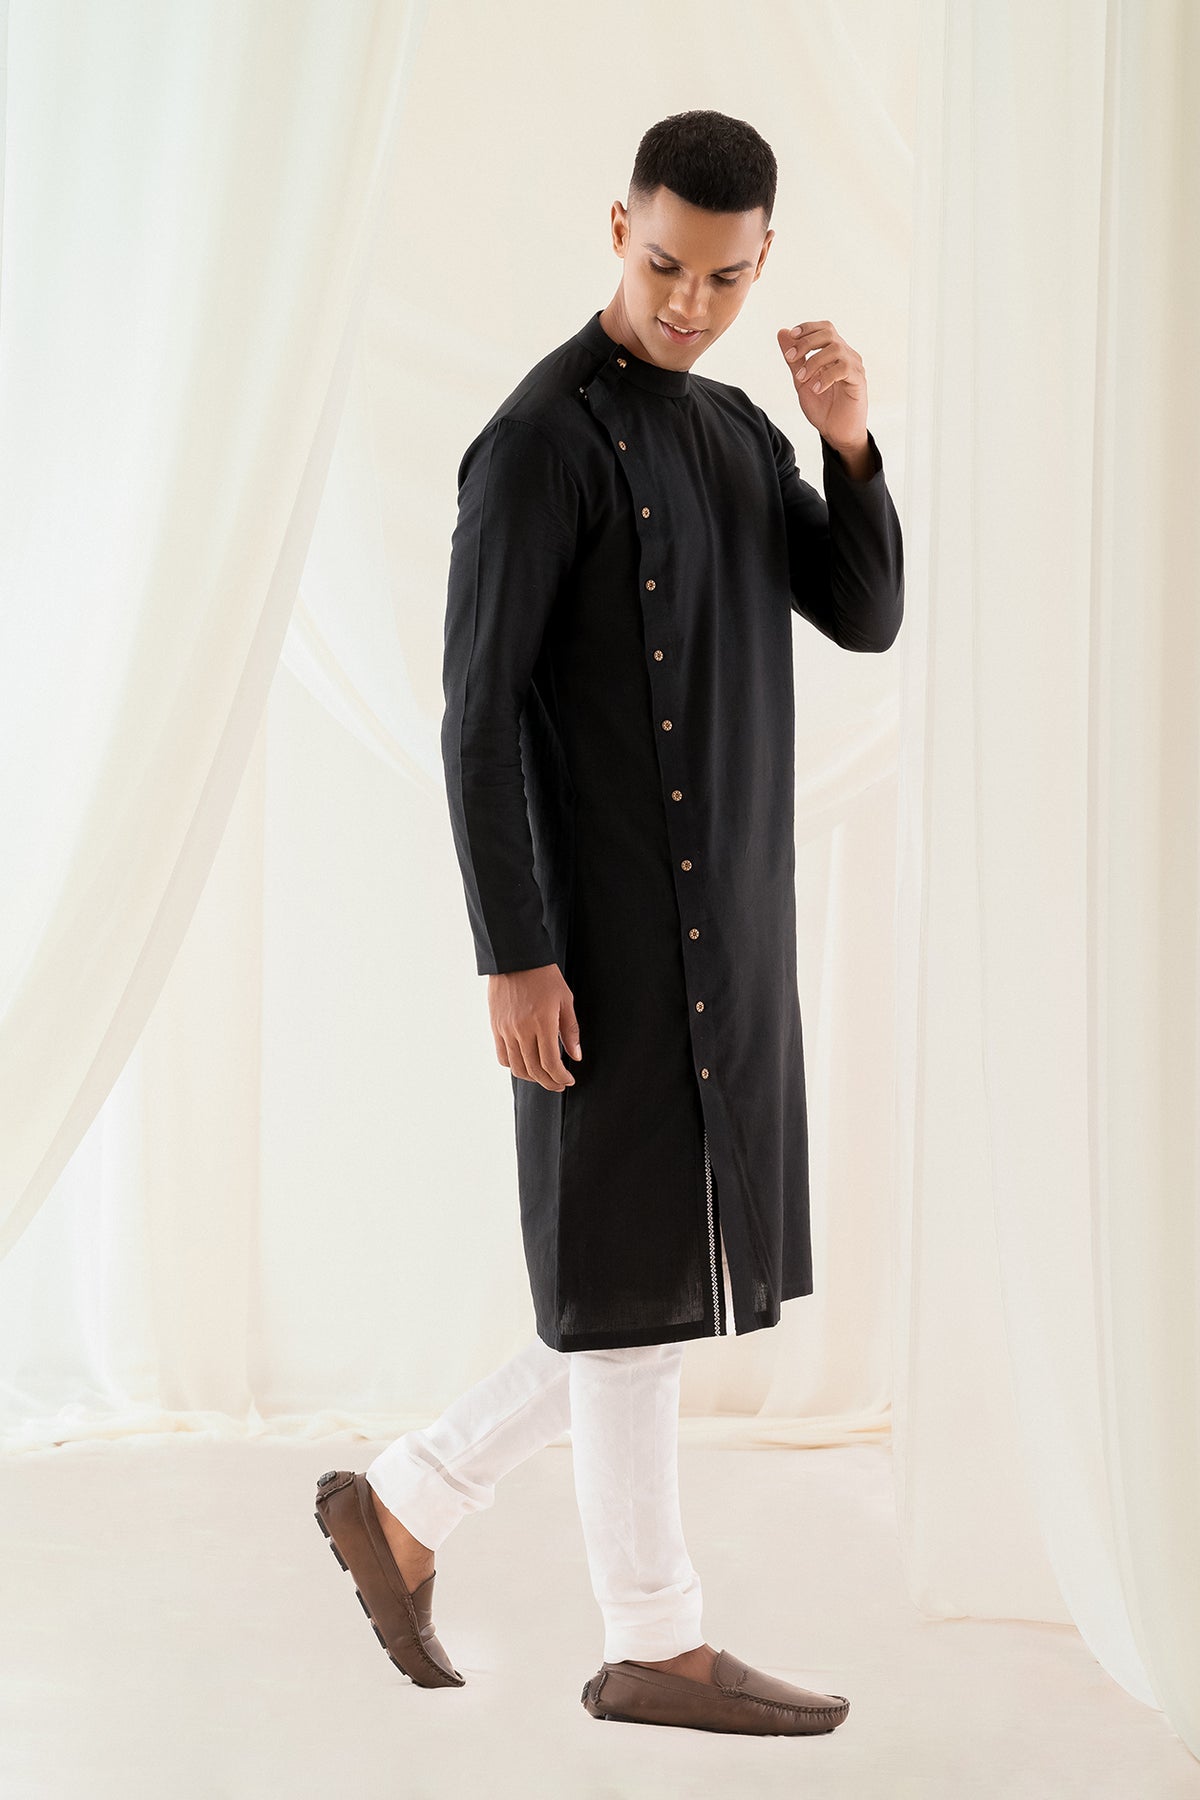 Black Long Kurta With Animal Printed Placed On The Back